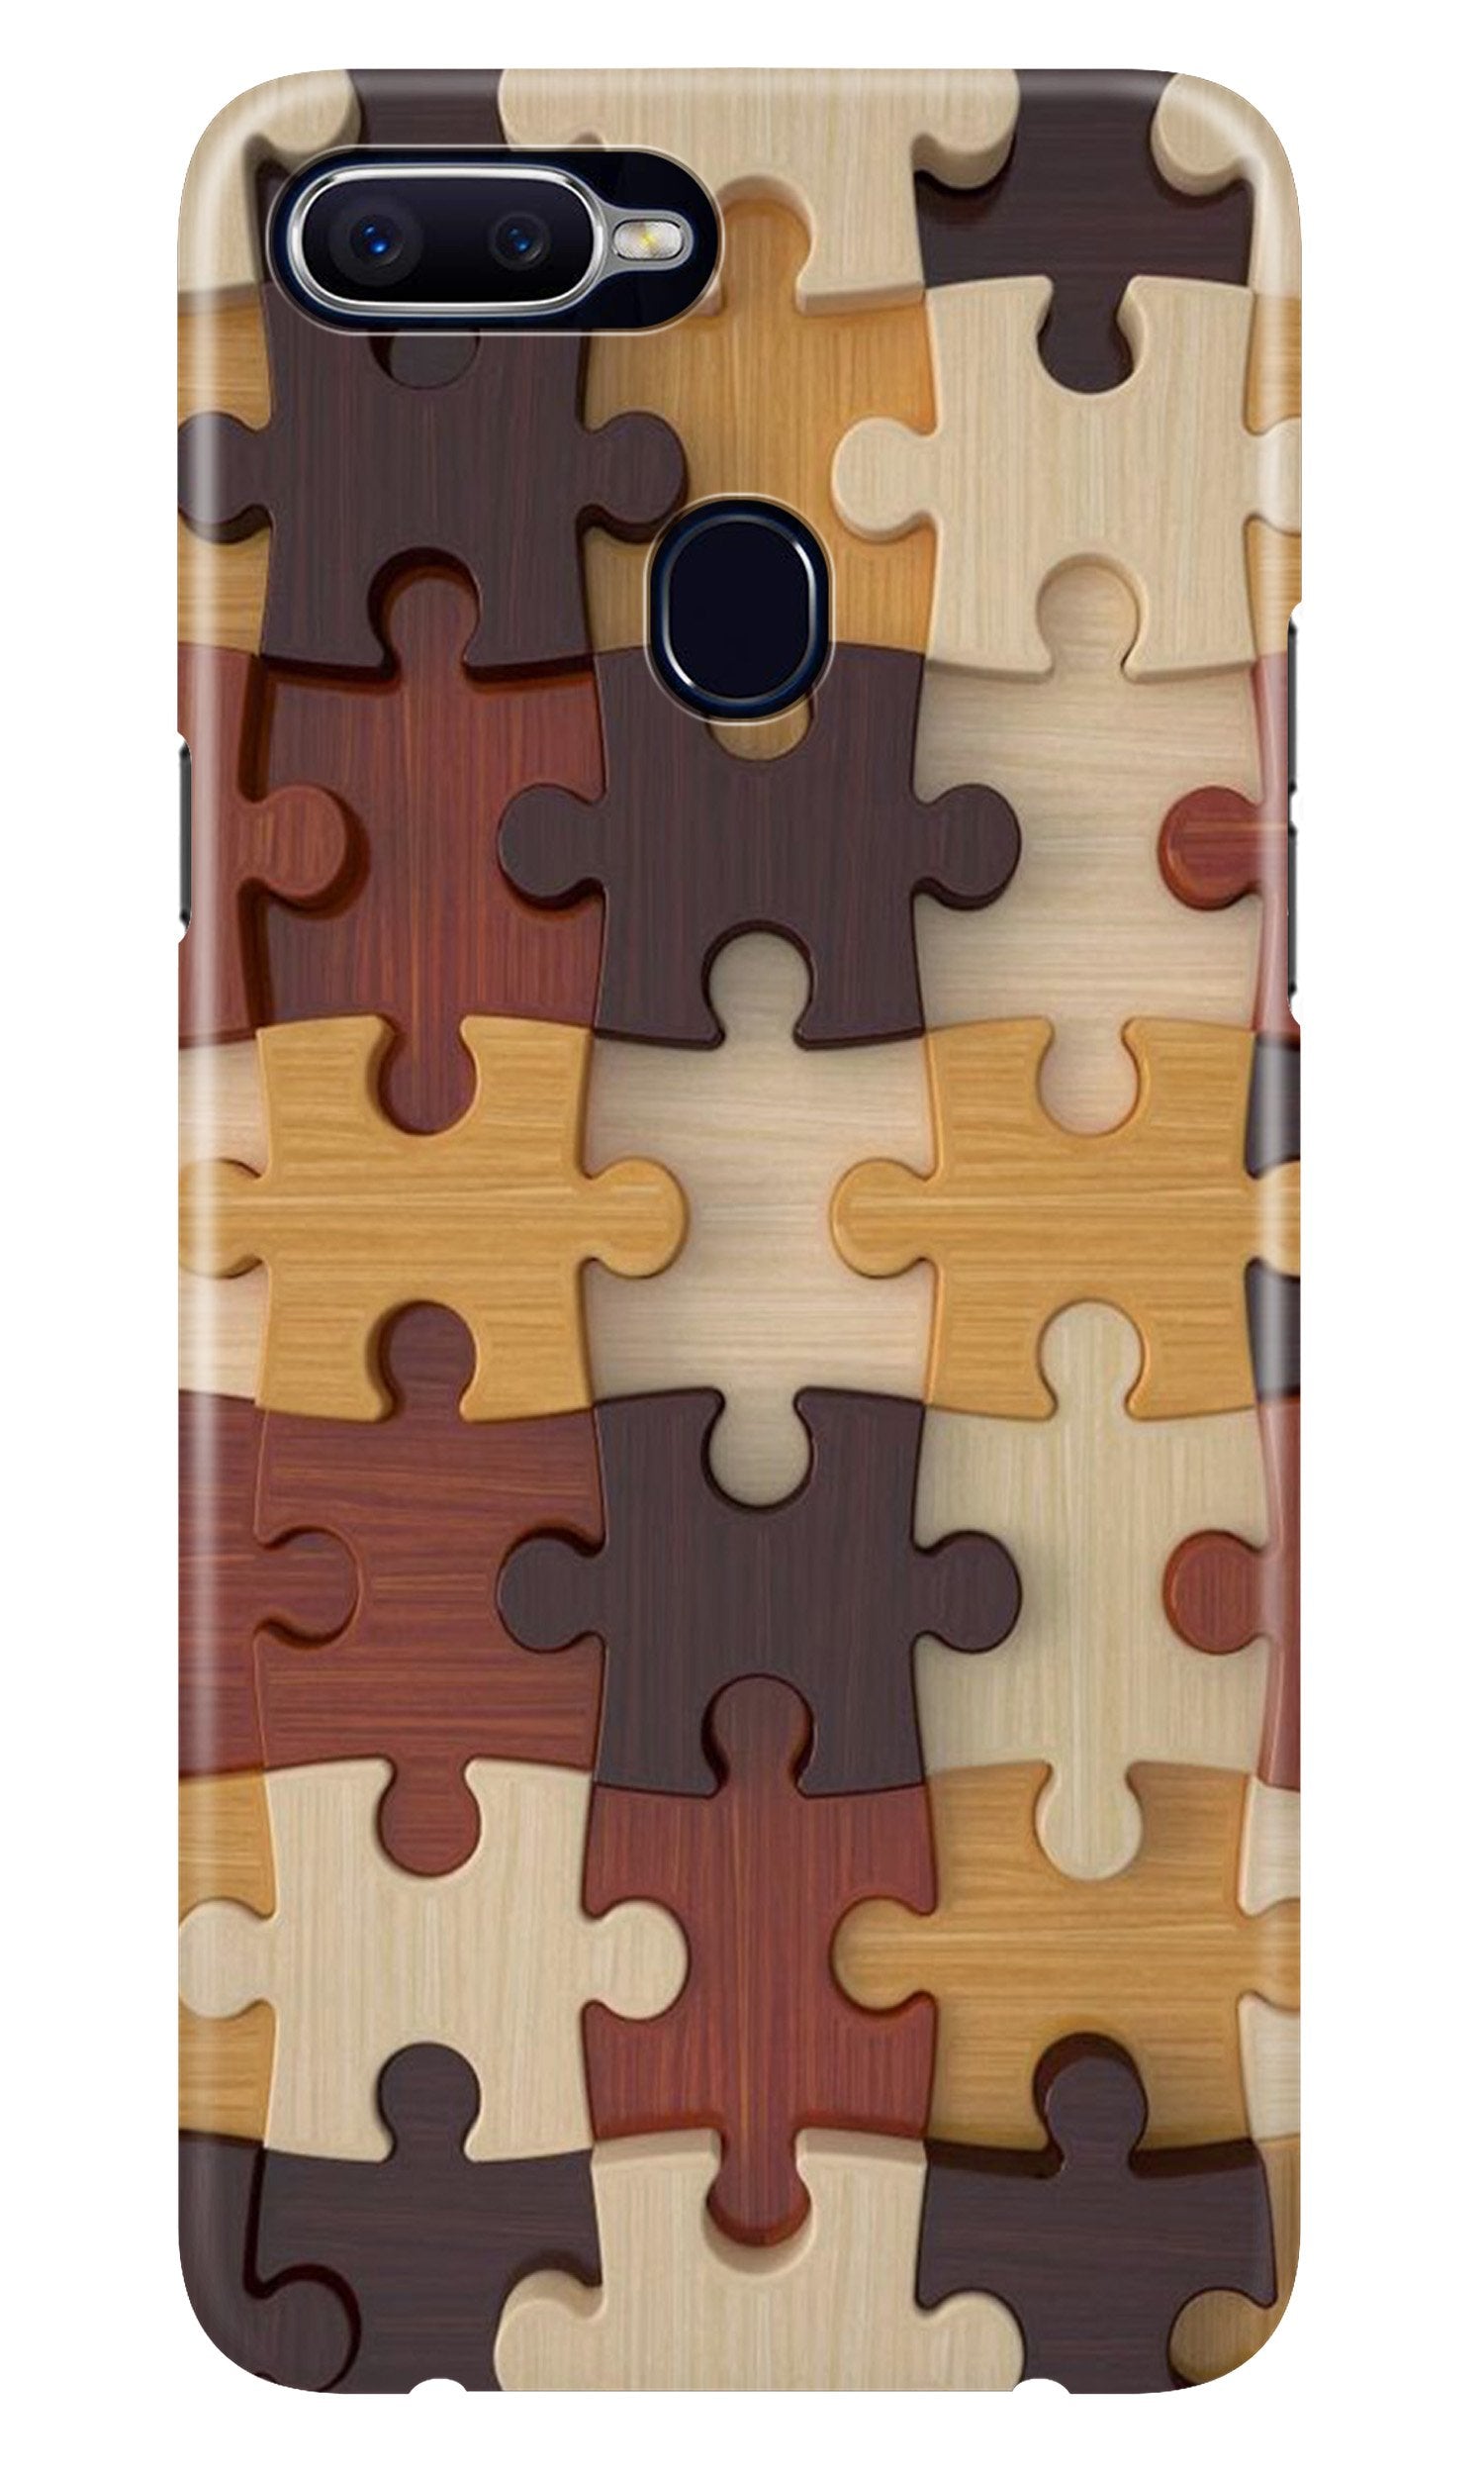 Puzzle Pattern Case for Oppo A7 (Design No. 217)